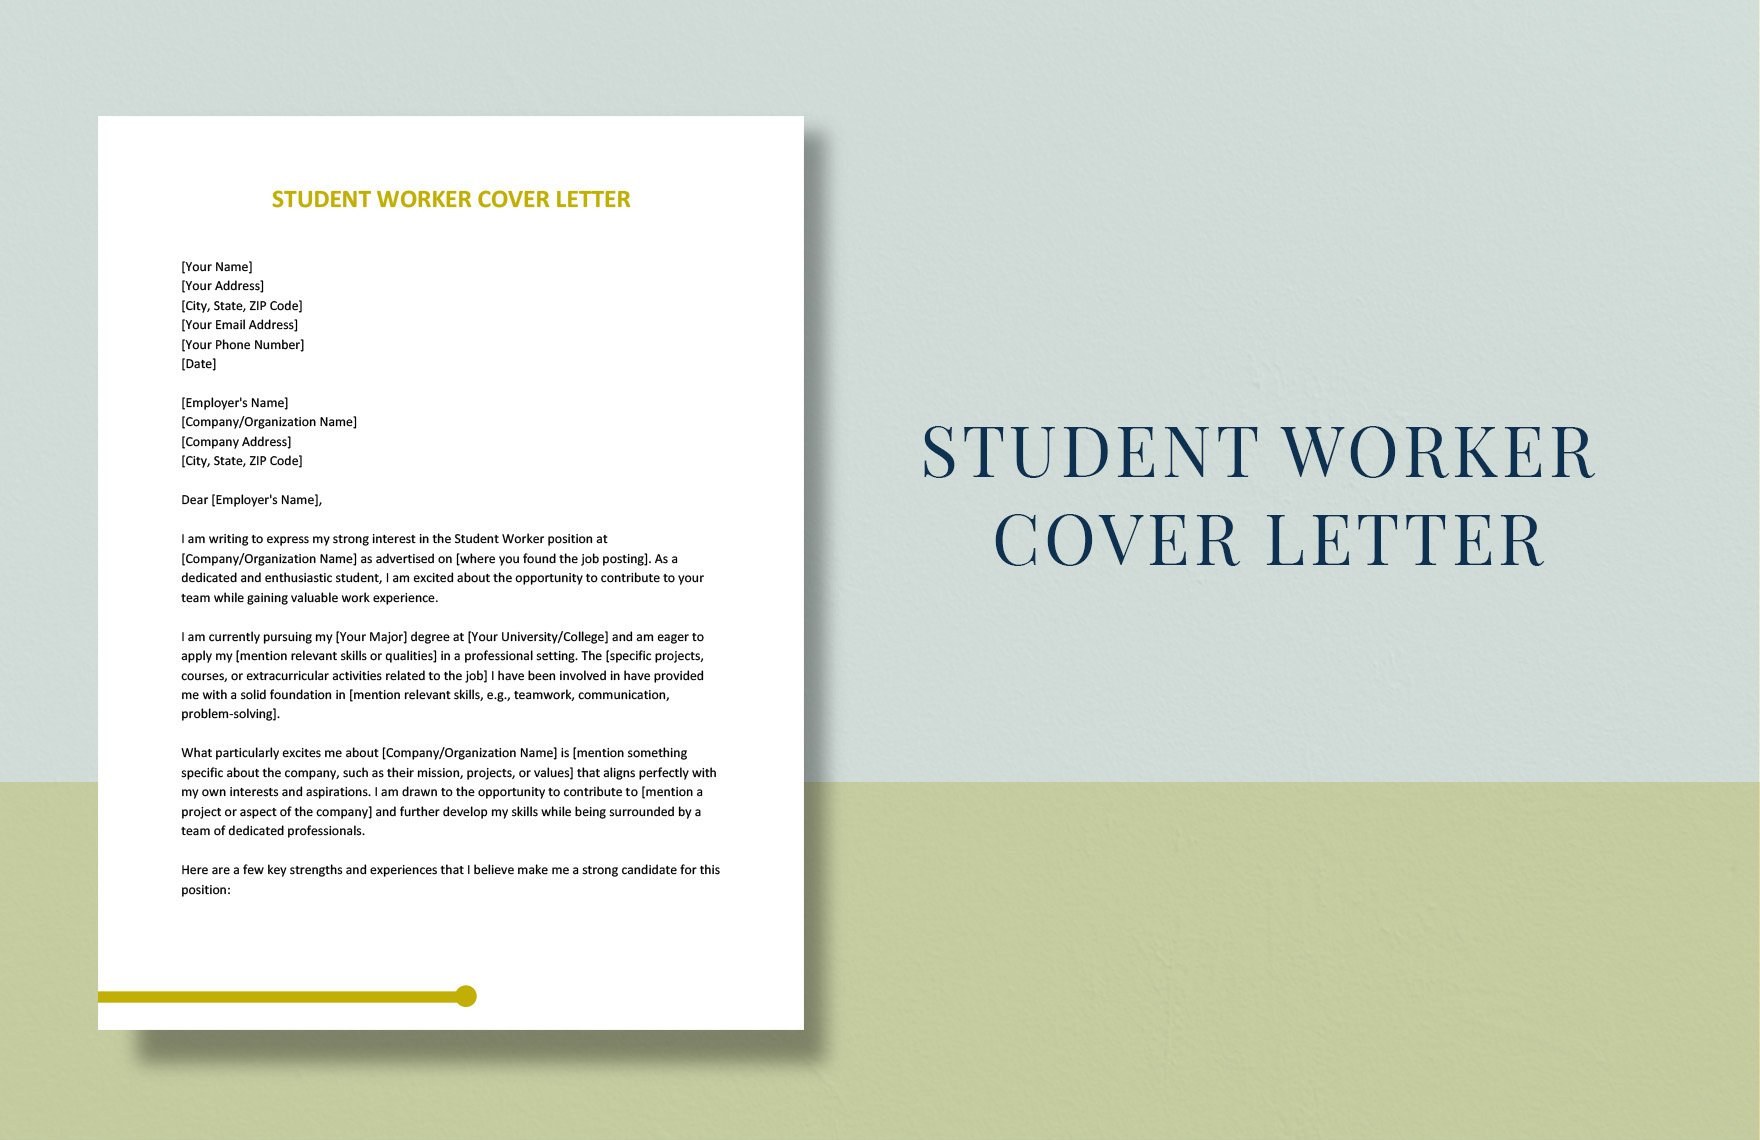 Student Worker Cover Letter in Word, Google Docs